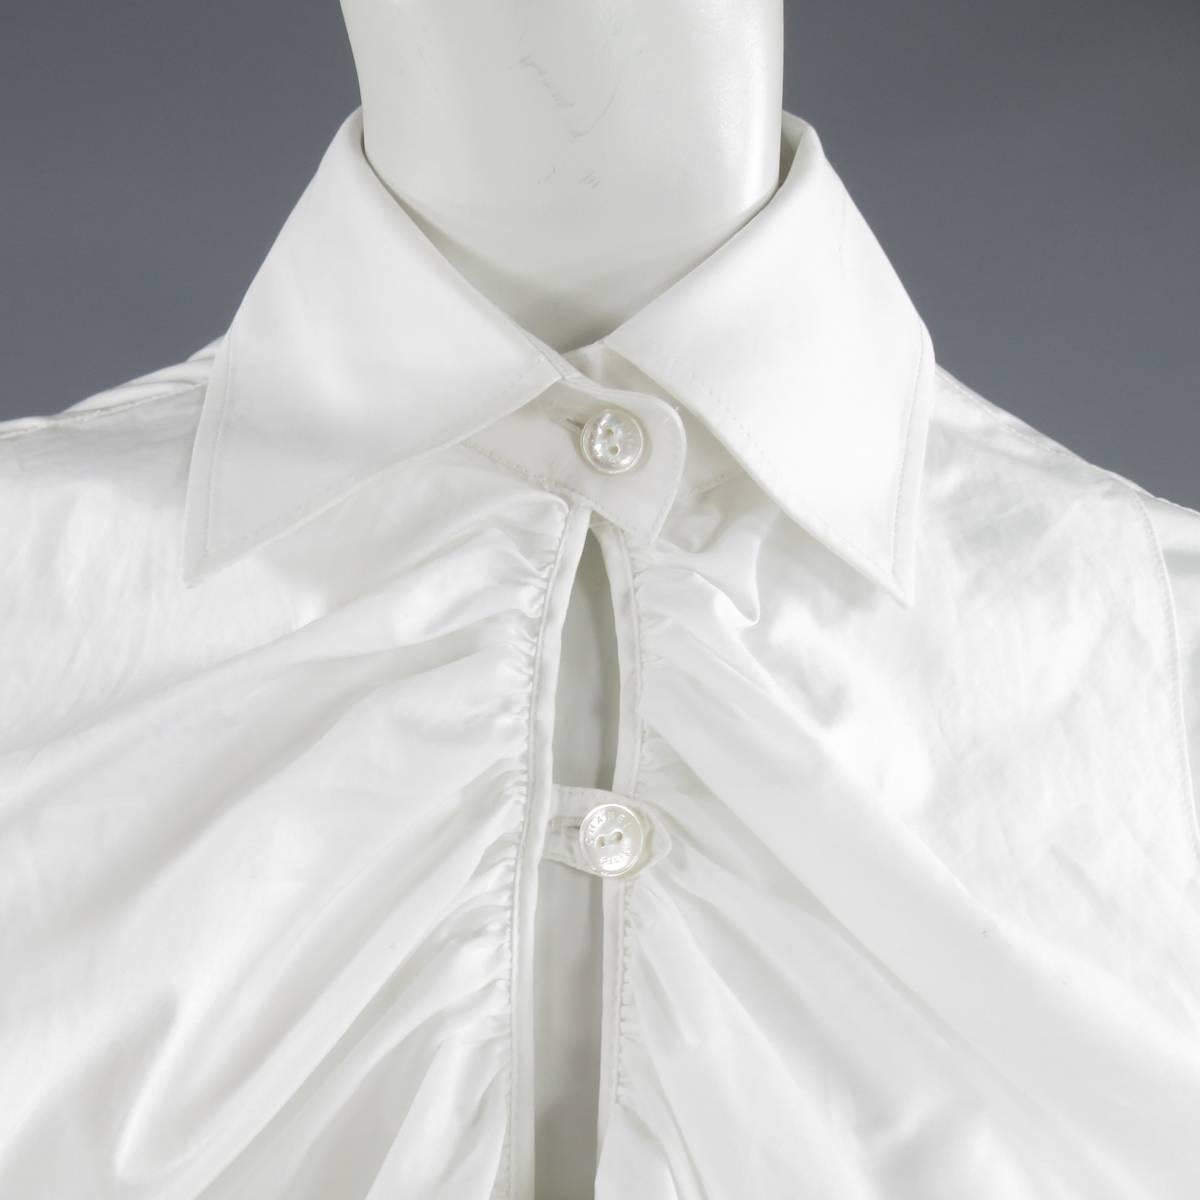 This fabulous CHANEL shirt dress comes ina light weight cotton and features a pointed collar, three quarter sleeves, and a button up closure with ruffled detail. Made in Italy.
 
Very Good Pre-Owned Condition.
Marked: 42
 
Measurements:
